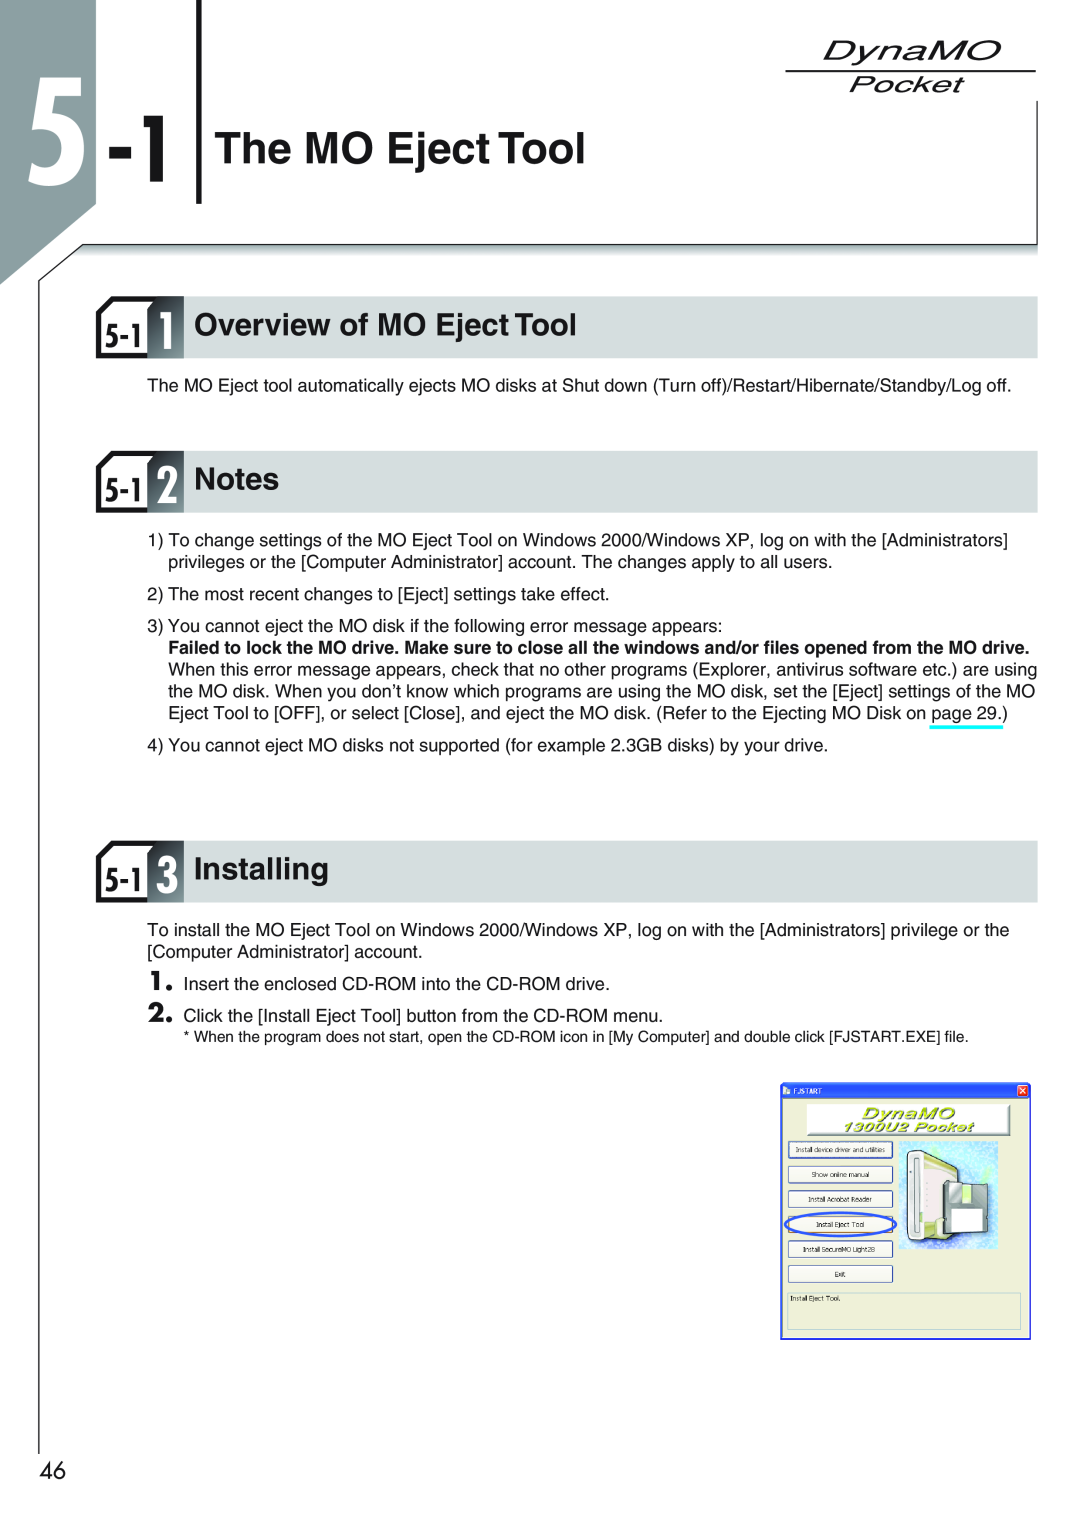 Fujitsu 1300U2 user manual 5 -1 The MO Eject Tool, 5-1 1 Overview of MO Eject Tool, 5-1 2 Notes, 5-1 3 Installing 